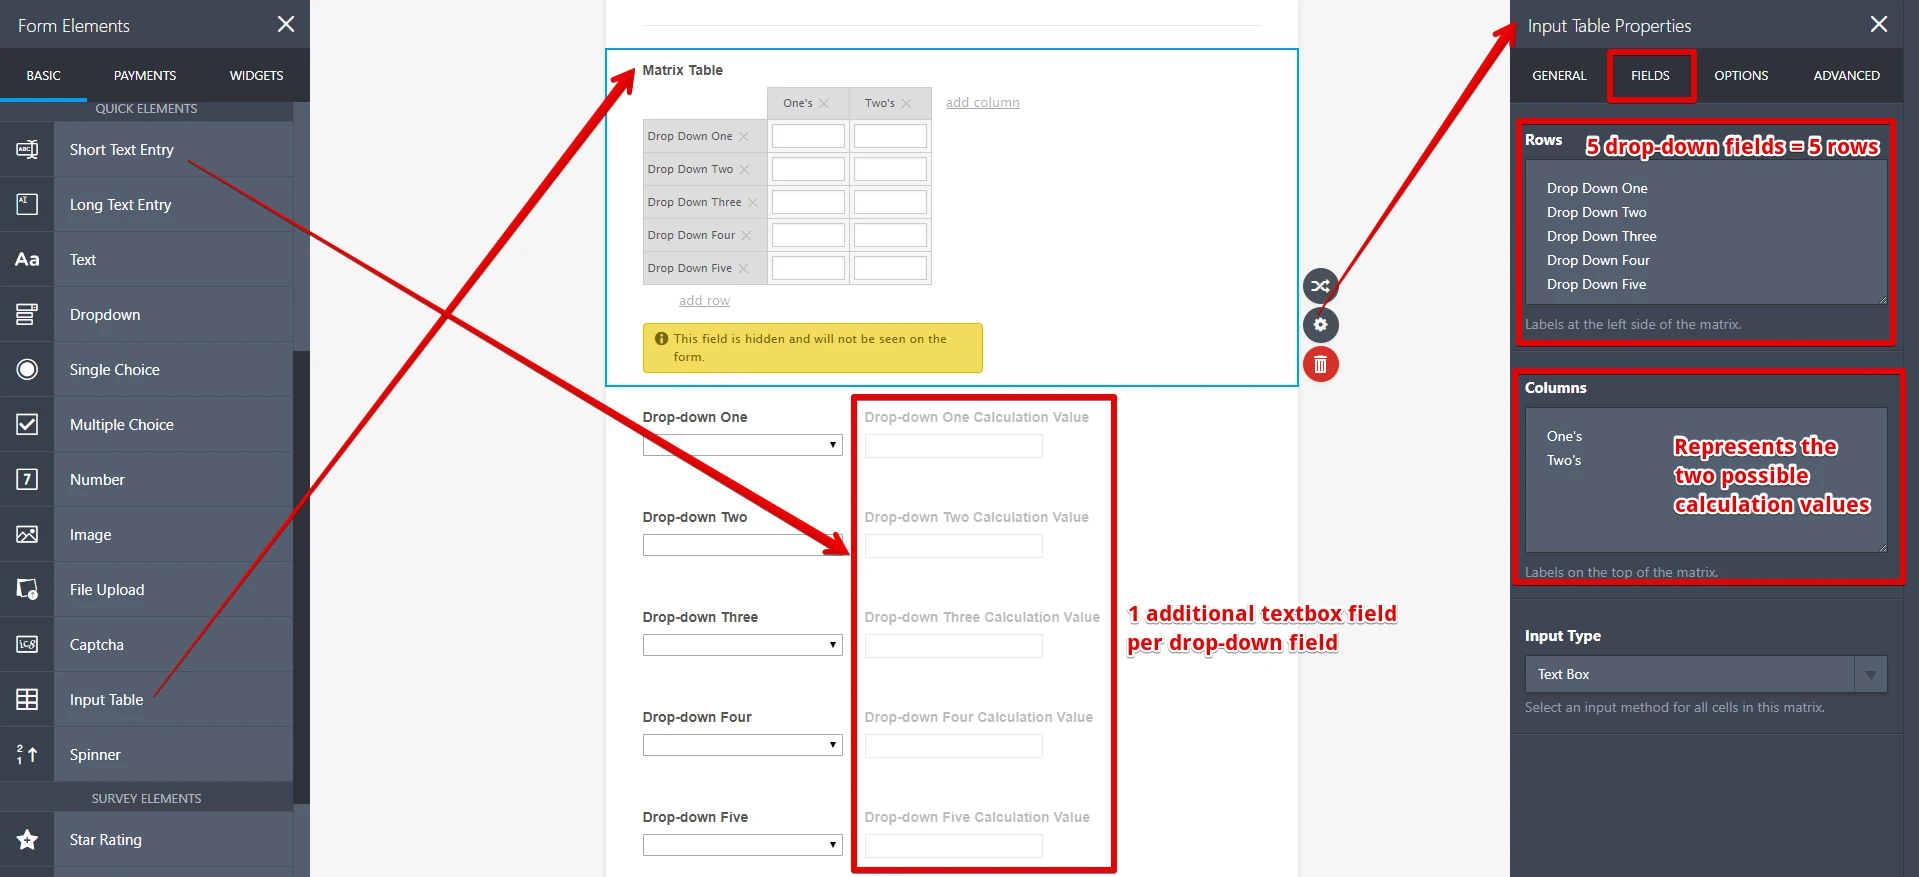 How to count selected options from a drop down field? Image 1 Screenshot 80